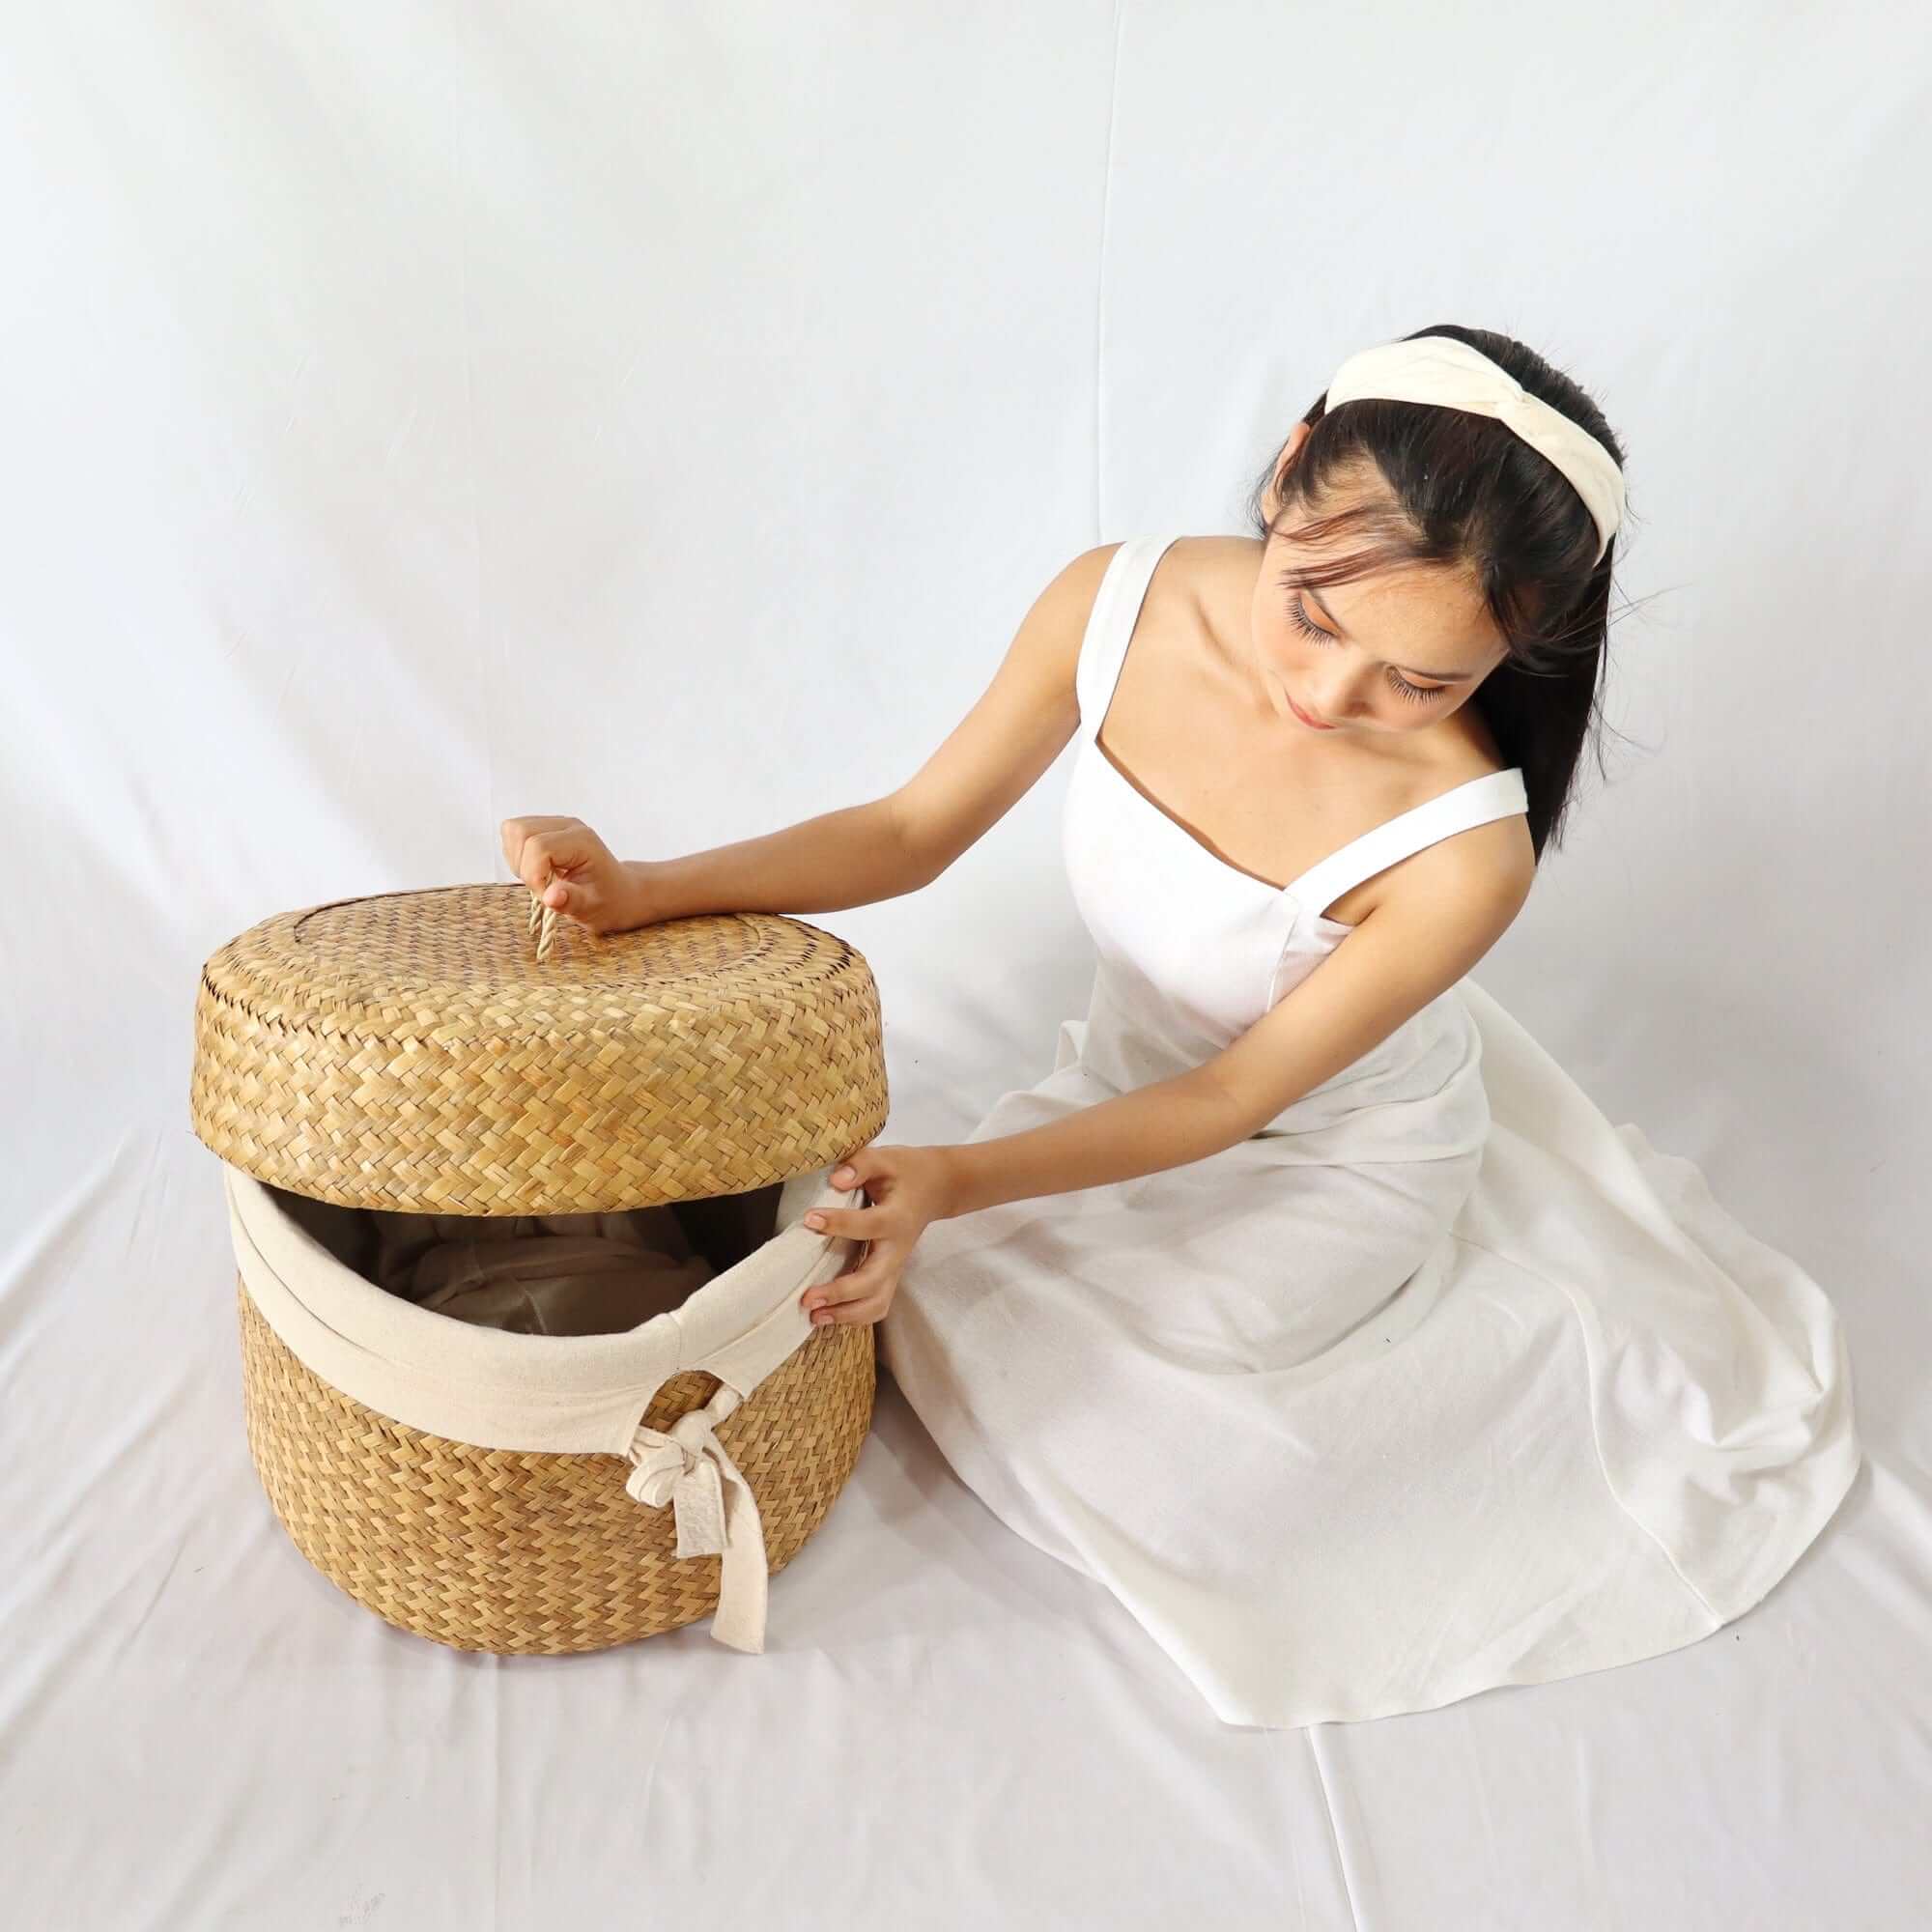 THAIHOME Baskets & Trays KAN DA Handwoven Laundry Basket With Handles and a Lid